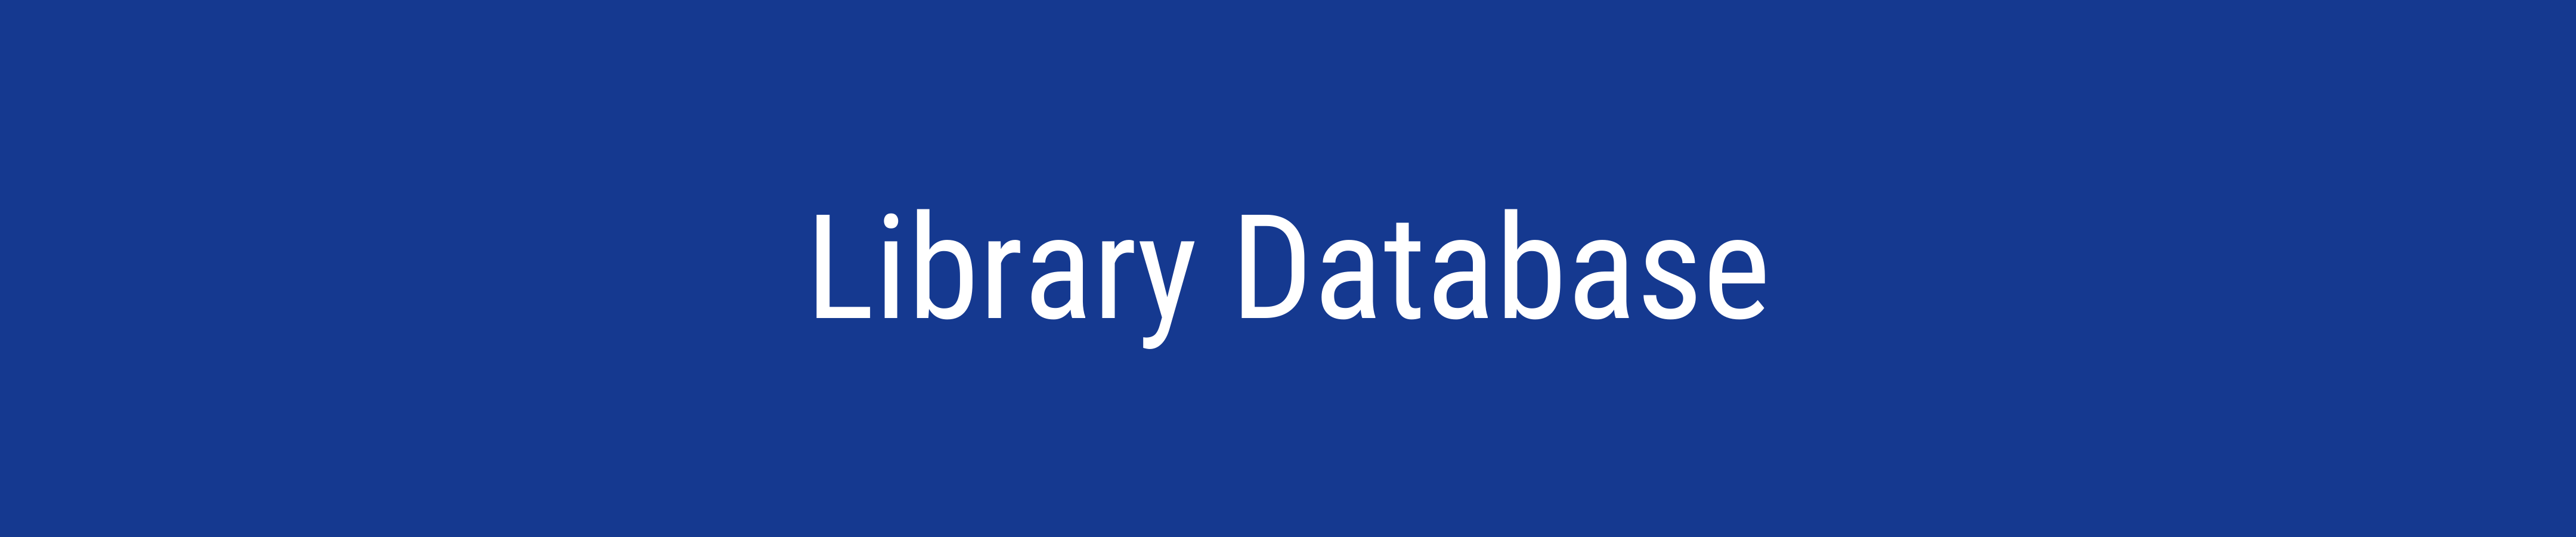 Library Database